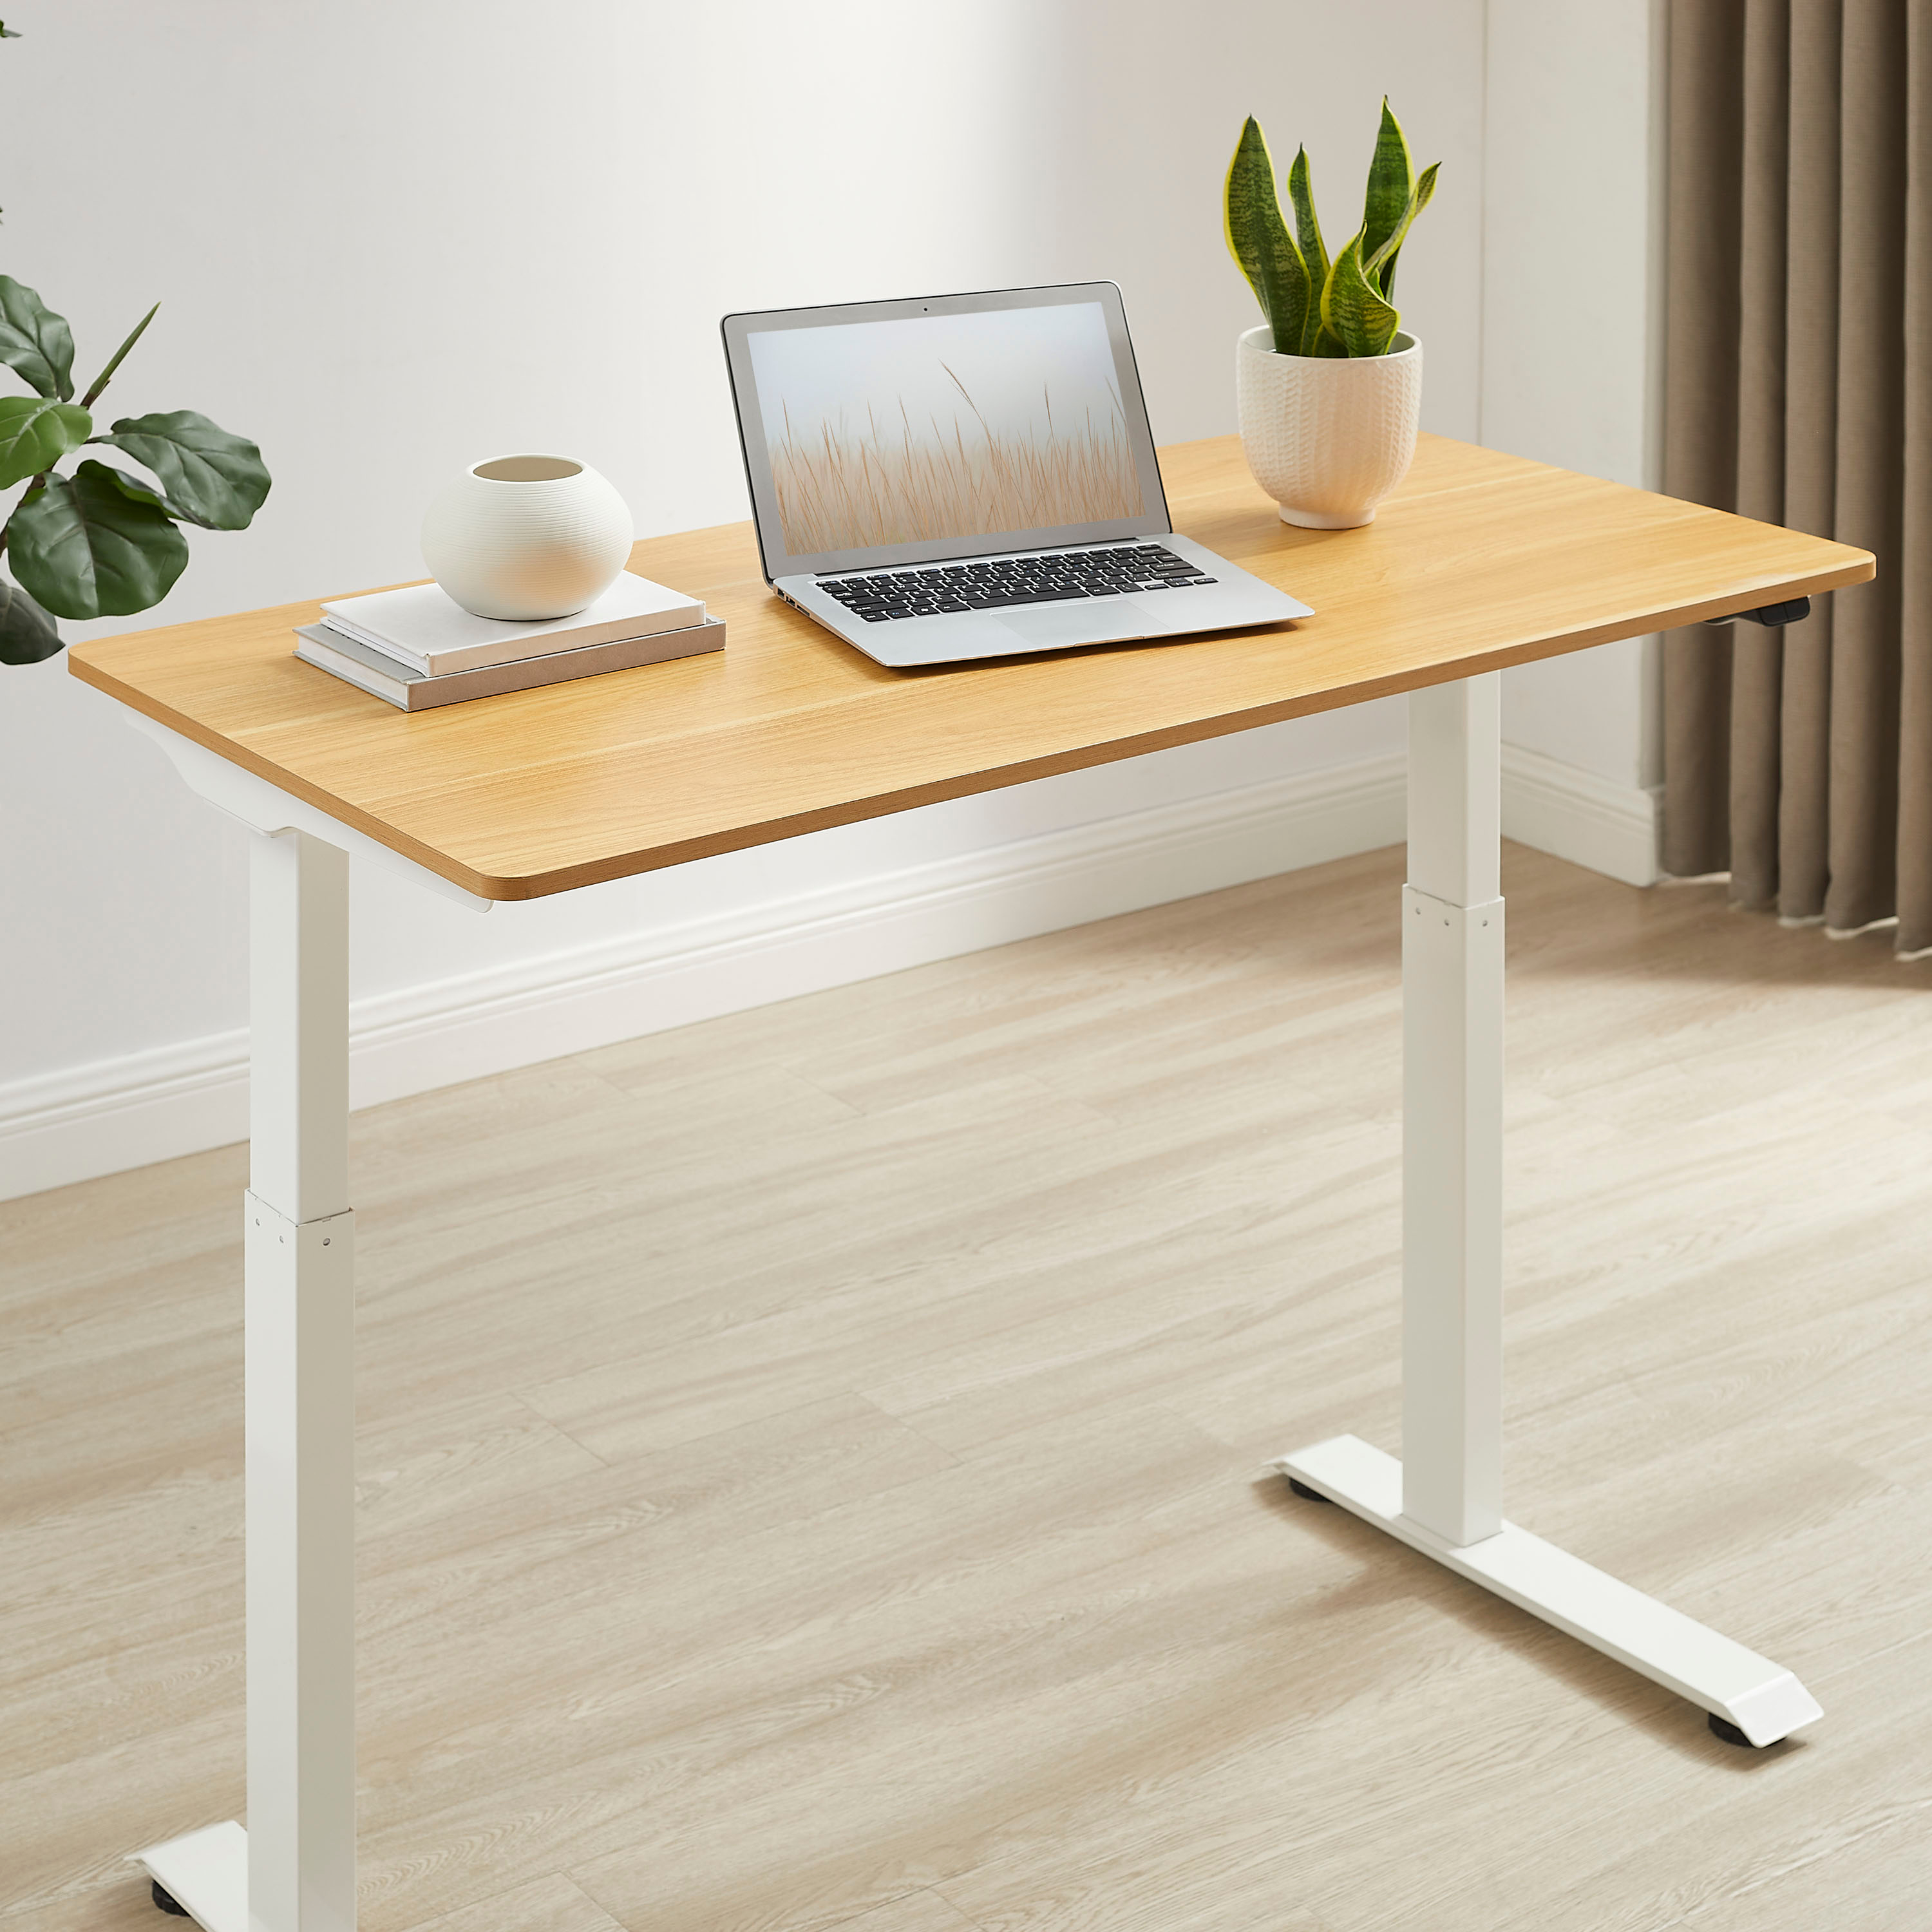 Insignia™ Adjustable Standing Desk with Electronic Control 47.2